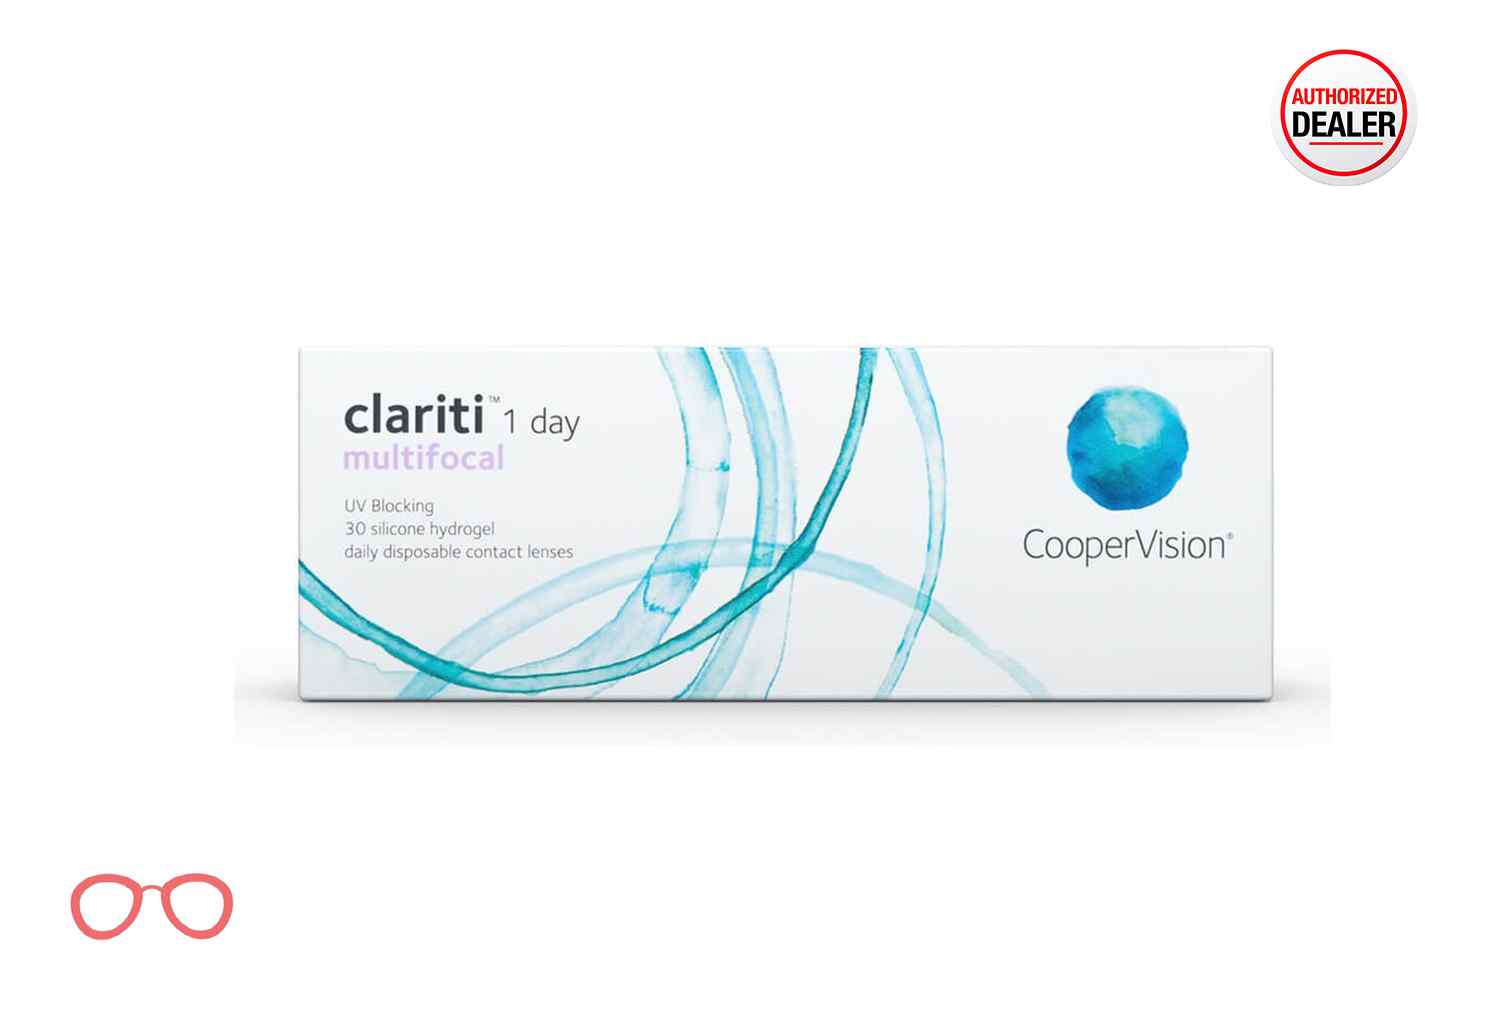 clarity 1 day multifocal